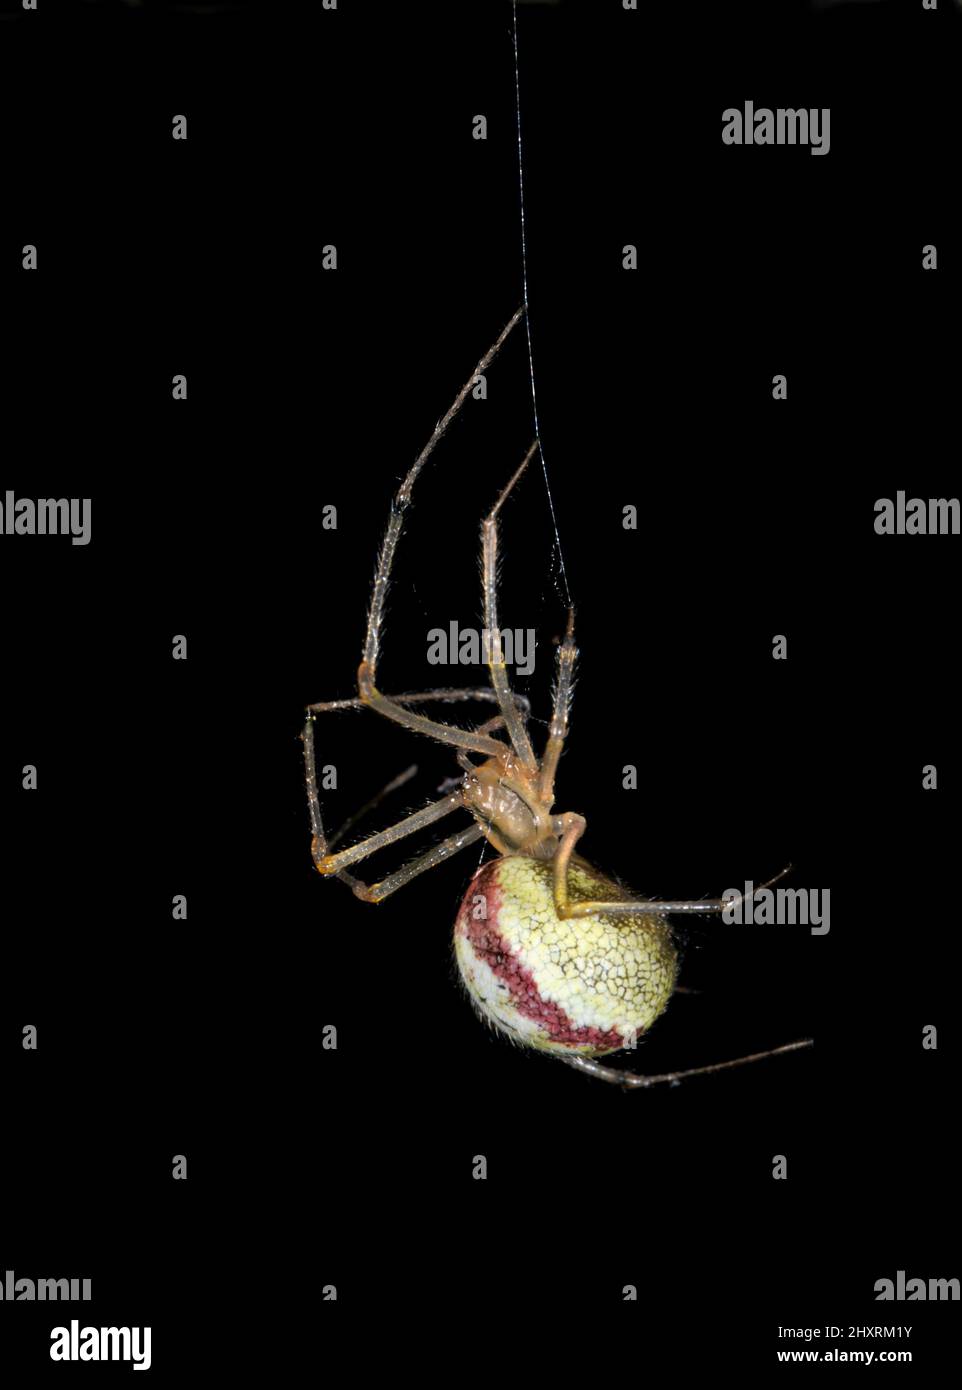 Comb-footed Spider - Enoplognatha ovata Stock Photo